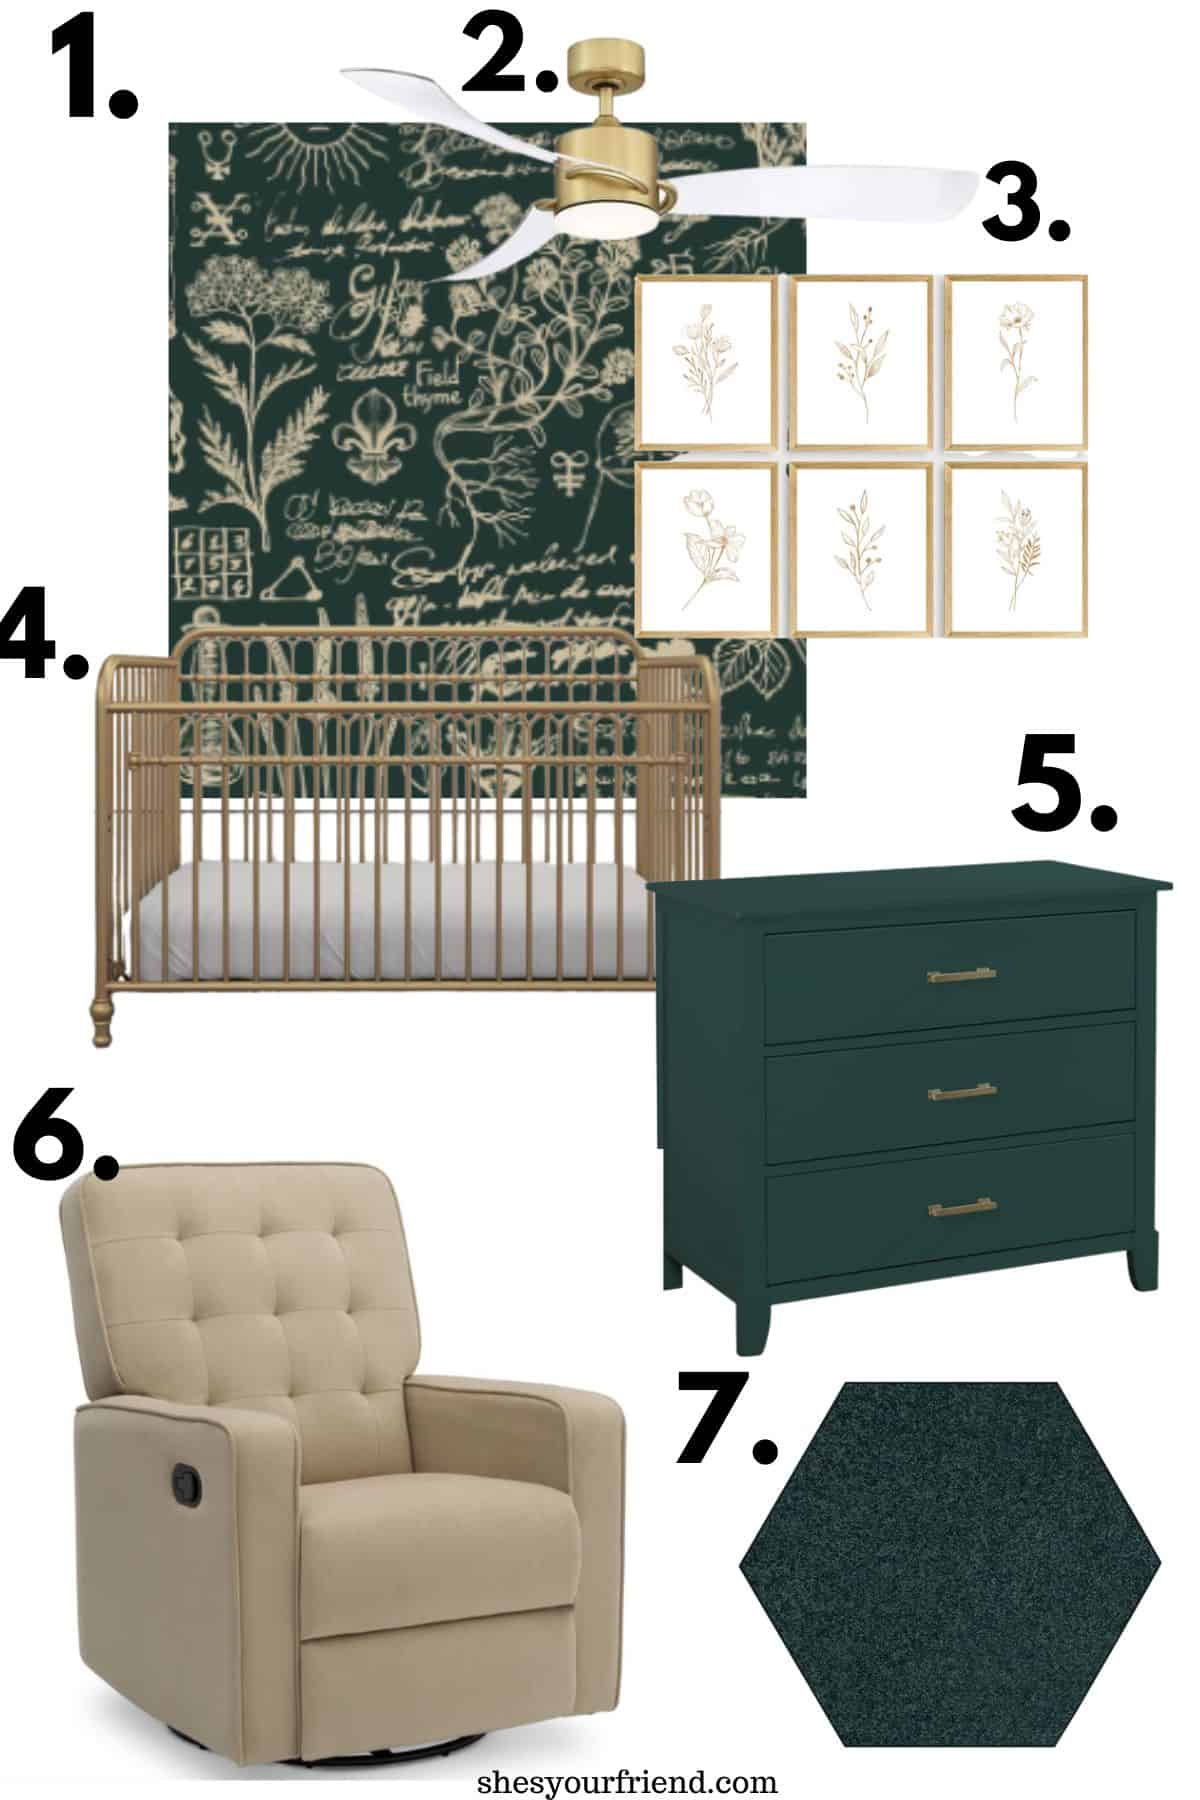 green and gold wall paper ceiling fan light wall art crib dresser glider and rug for a nursery